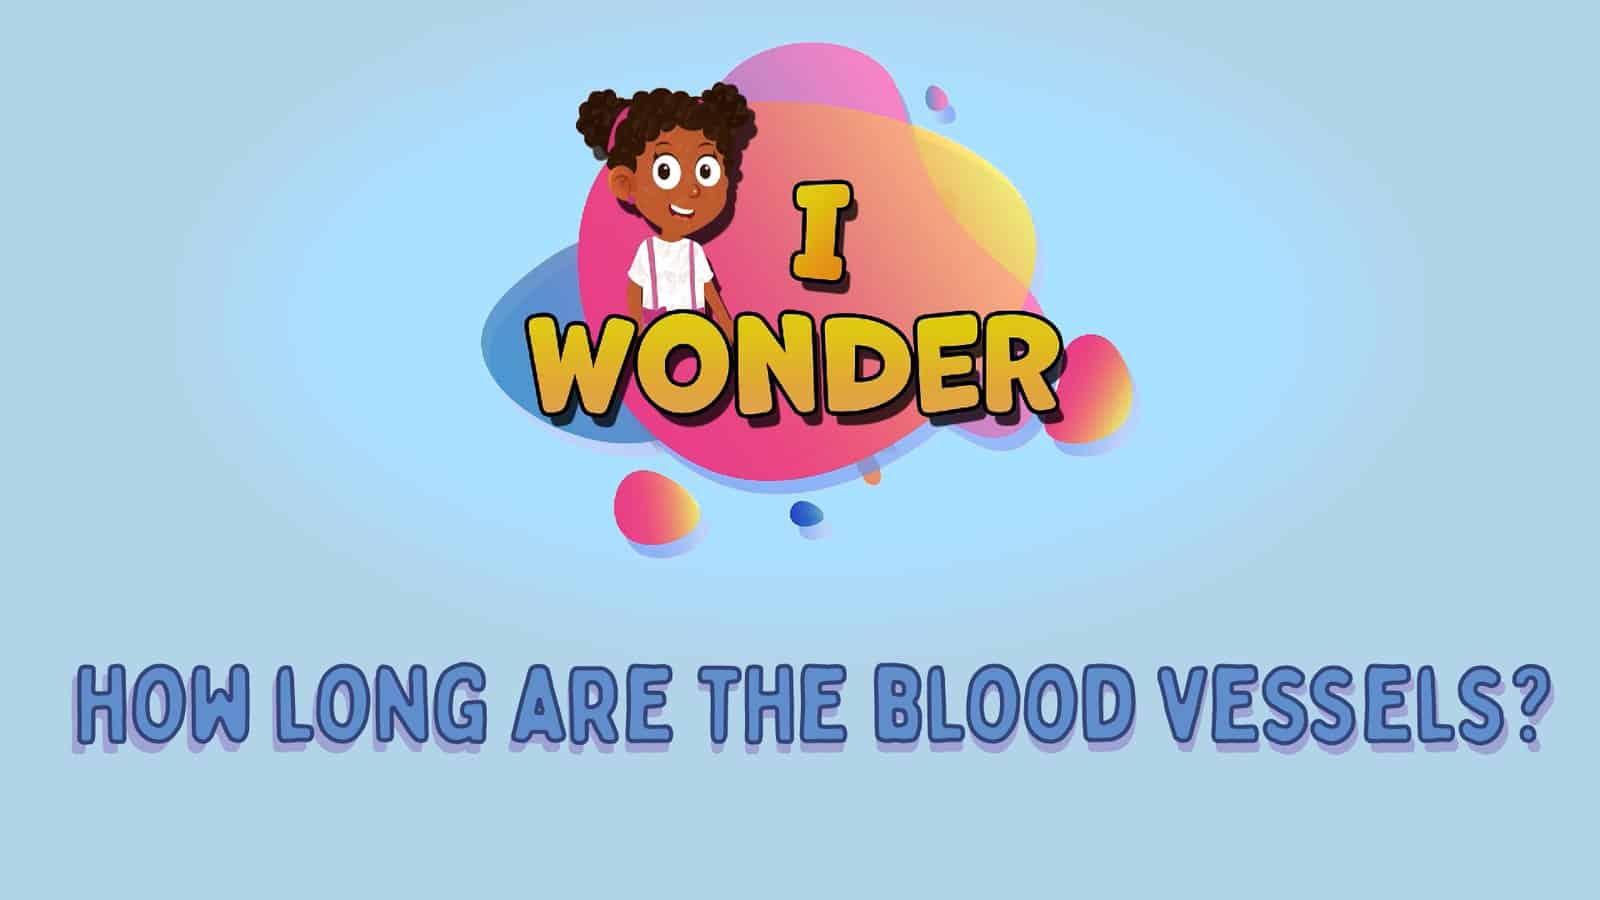 How Long Are The Blood Vessels?